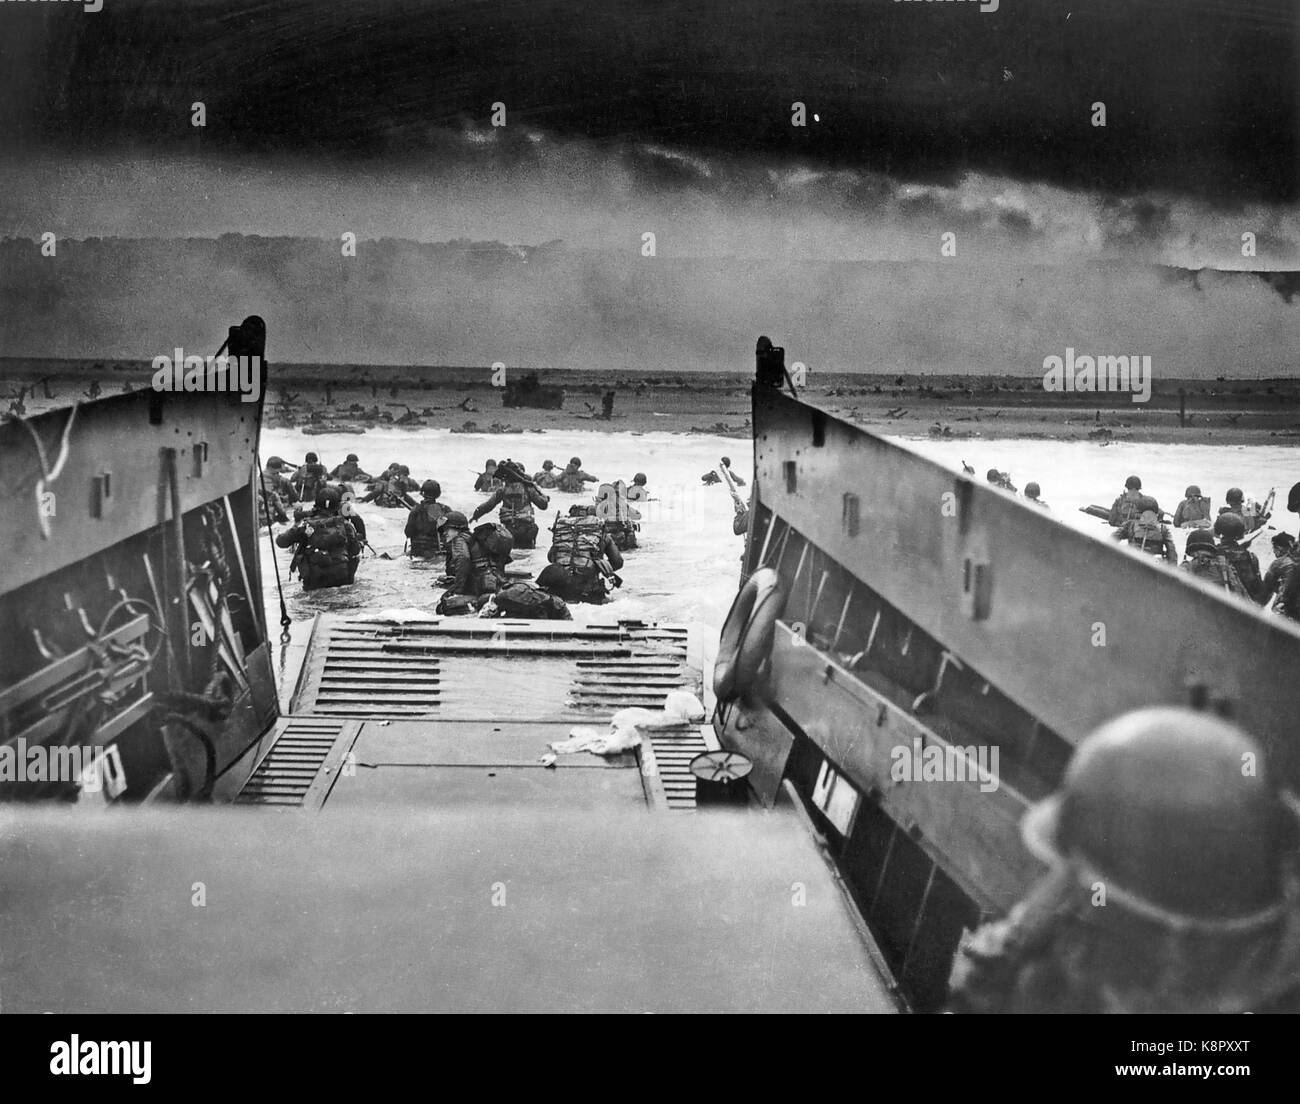 D-DAY  6 June 1944. Robert F. Sargent's photo of Americans from Company E, 16th Infantry, 1st Infantry Division, landing at Omaha Beach seen from the US Coastguard landing craft Samuel Chase. Sargent was a Coast Guard chief petty officer. Stock Photo